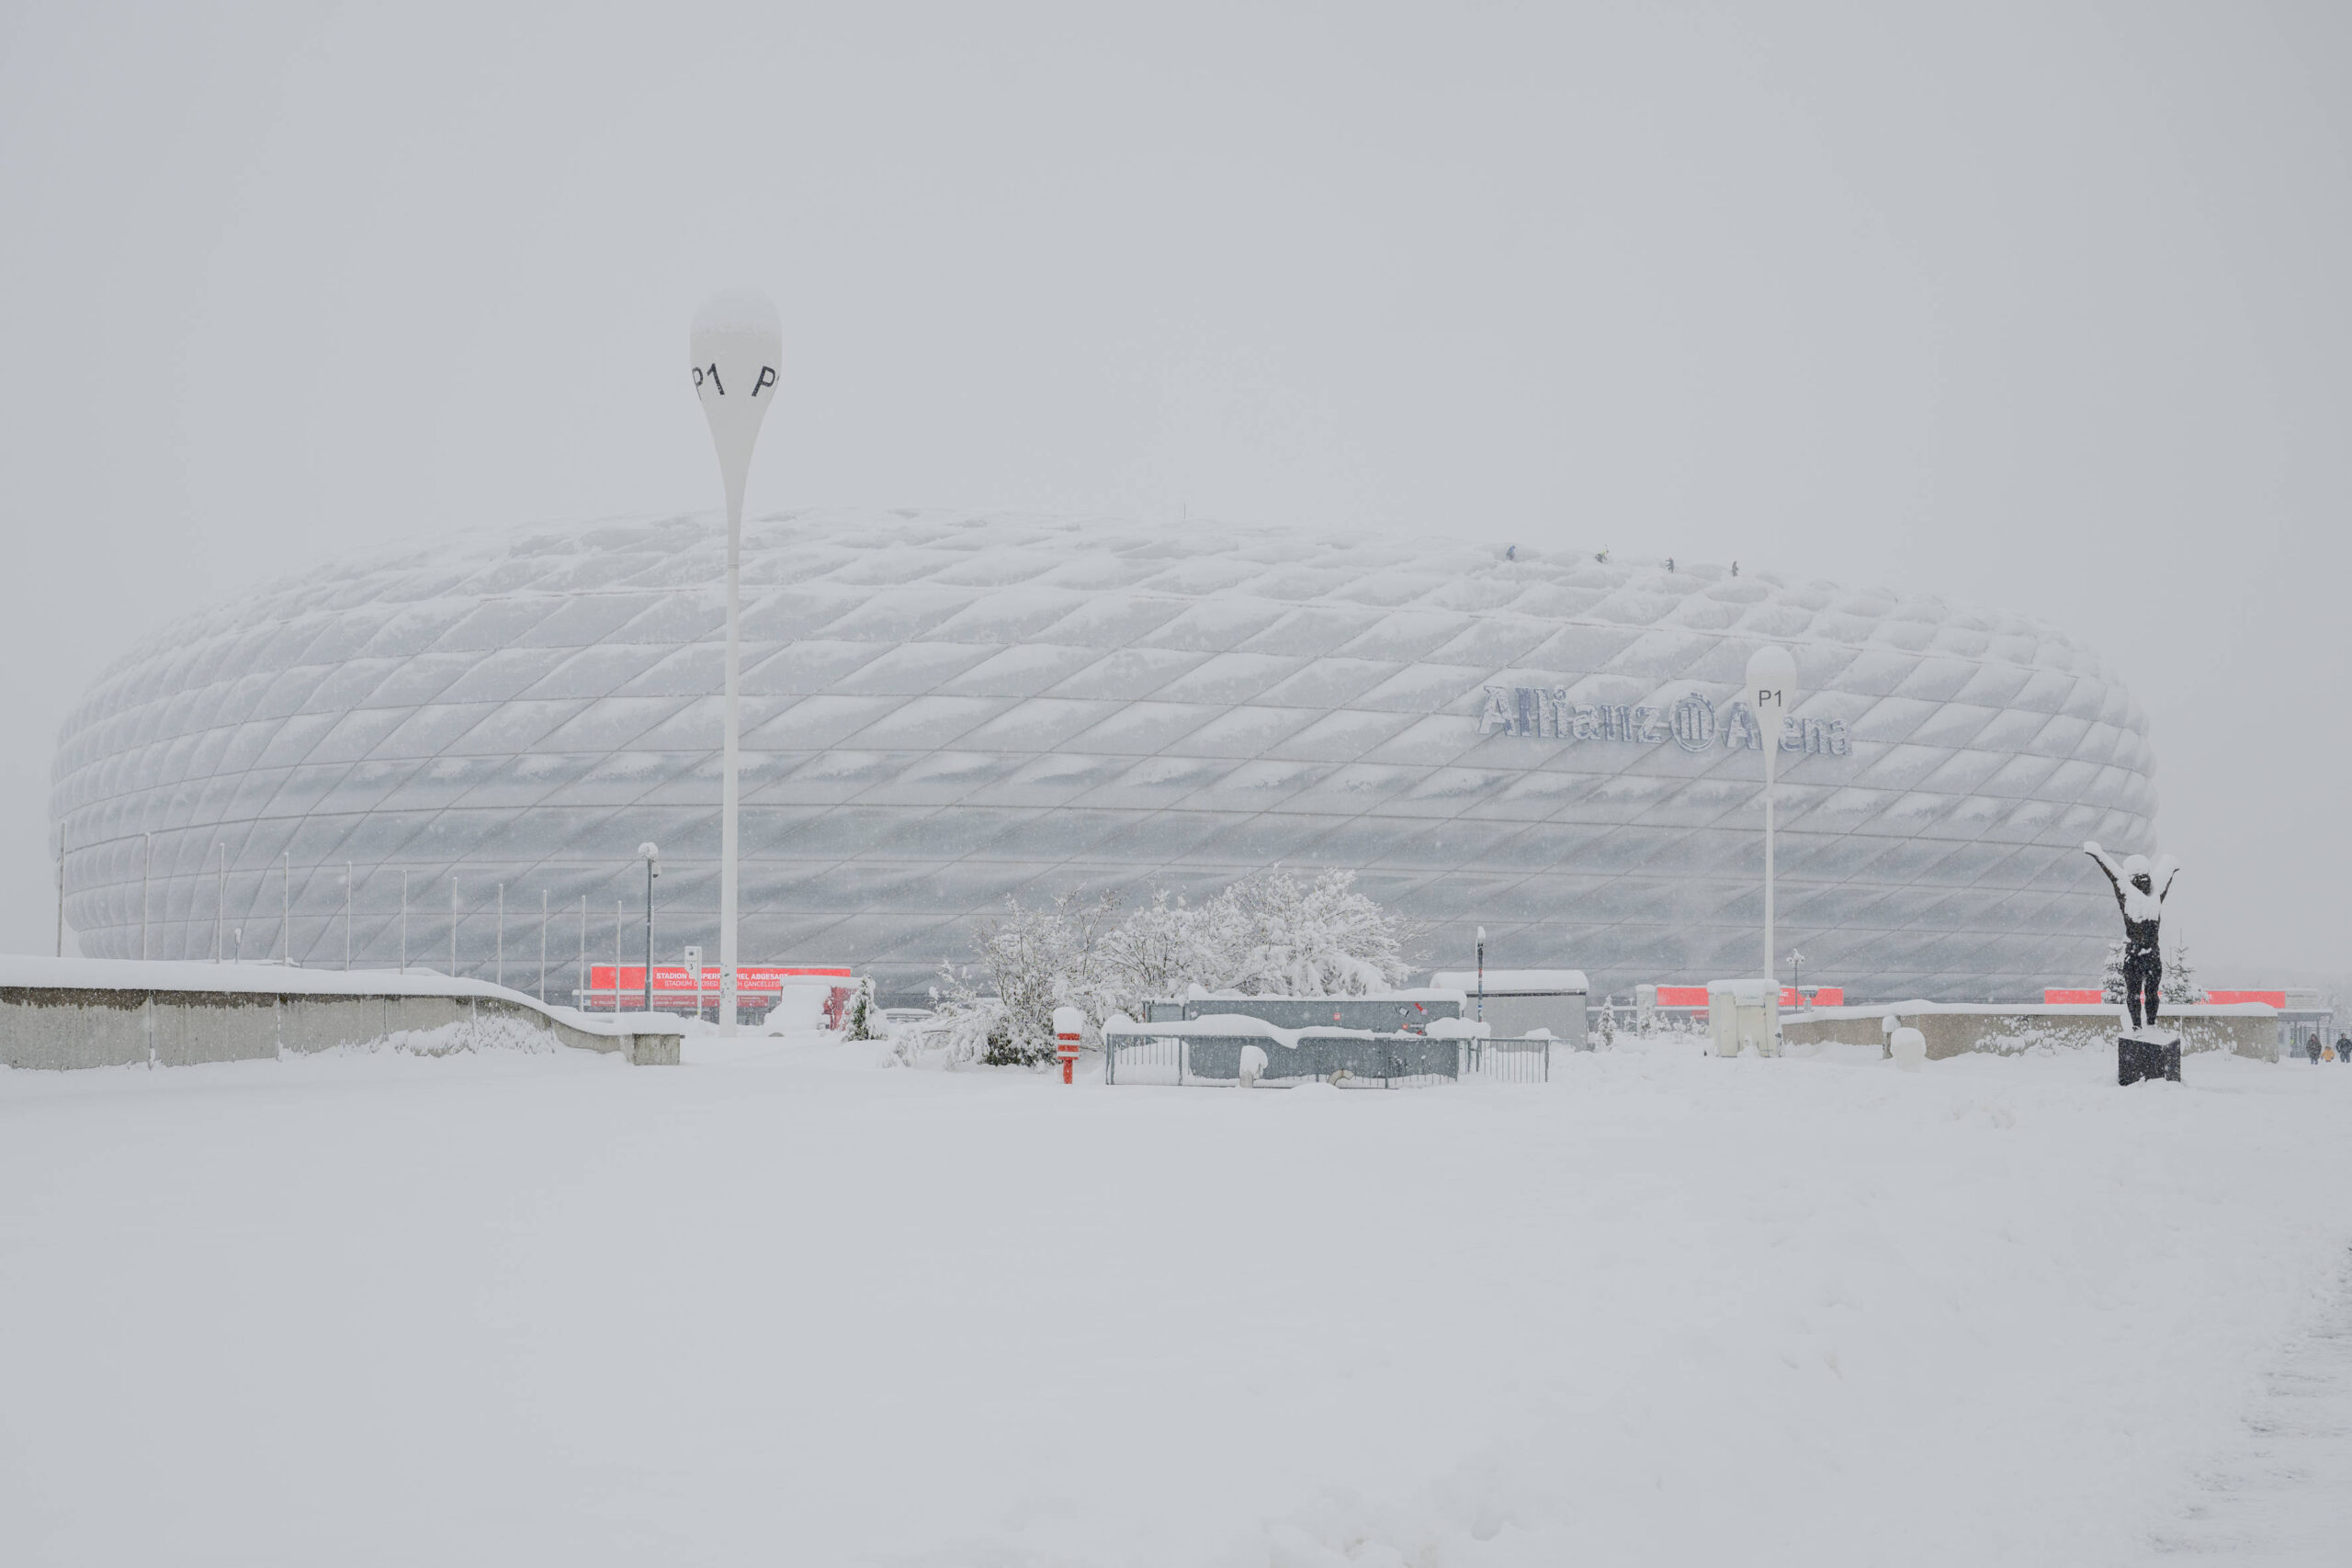 An image of the Allianz Arena covered in snow that caused the postponement of Bayern's match